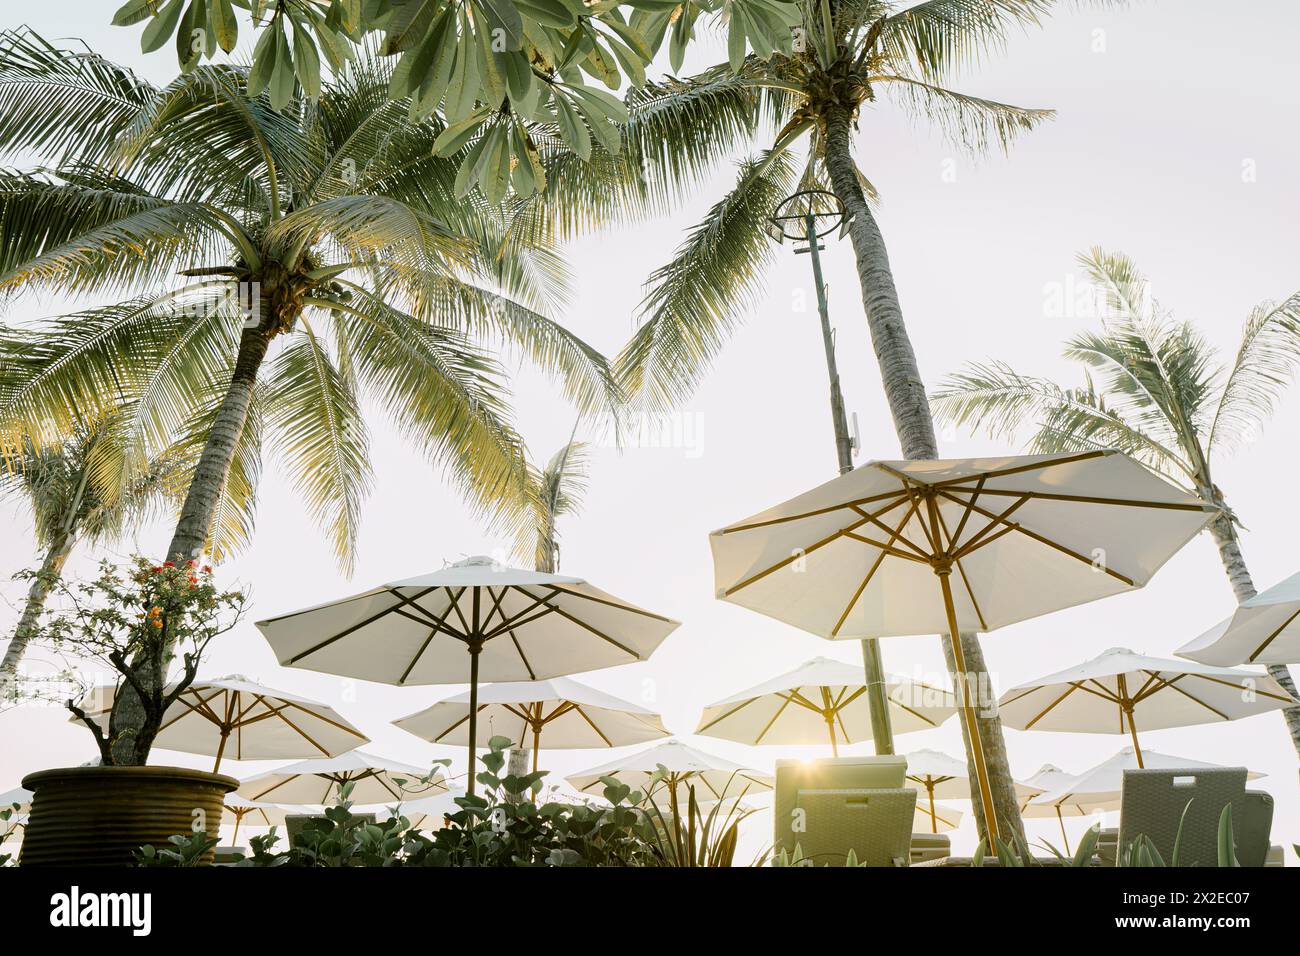 Beachfront with tall palm trees and lounge chairs under white umbrellas at sunset Stock Photo